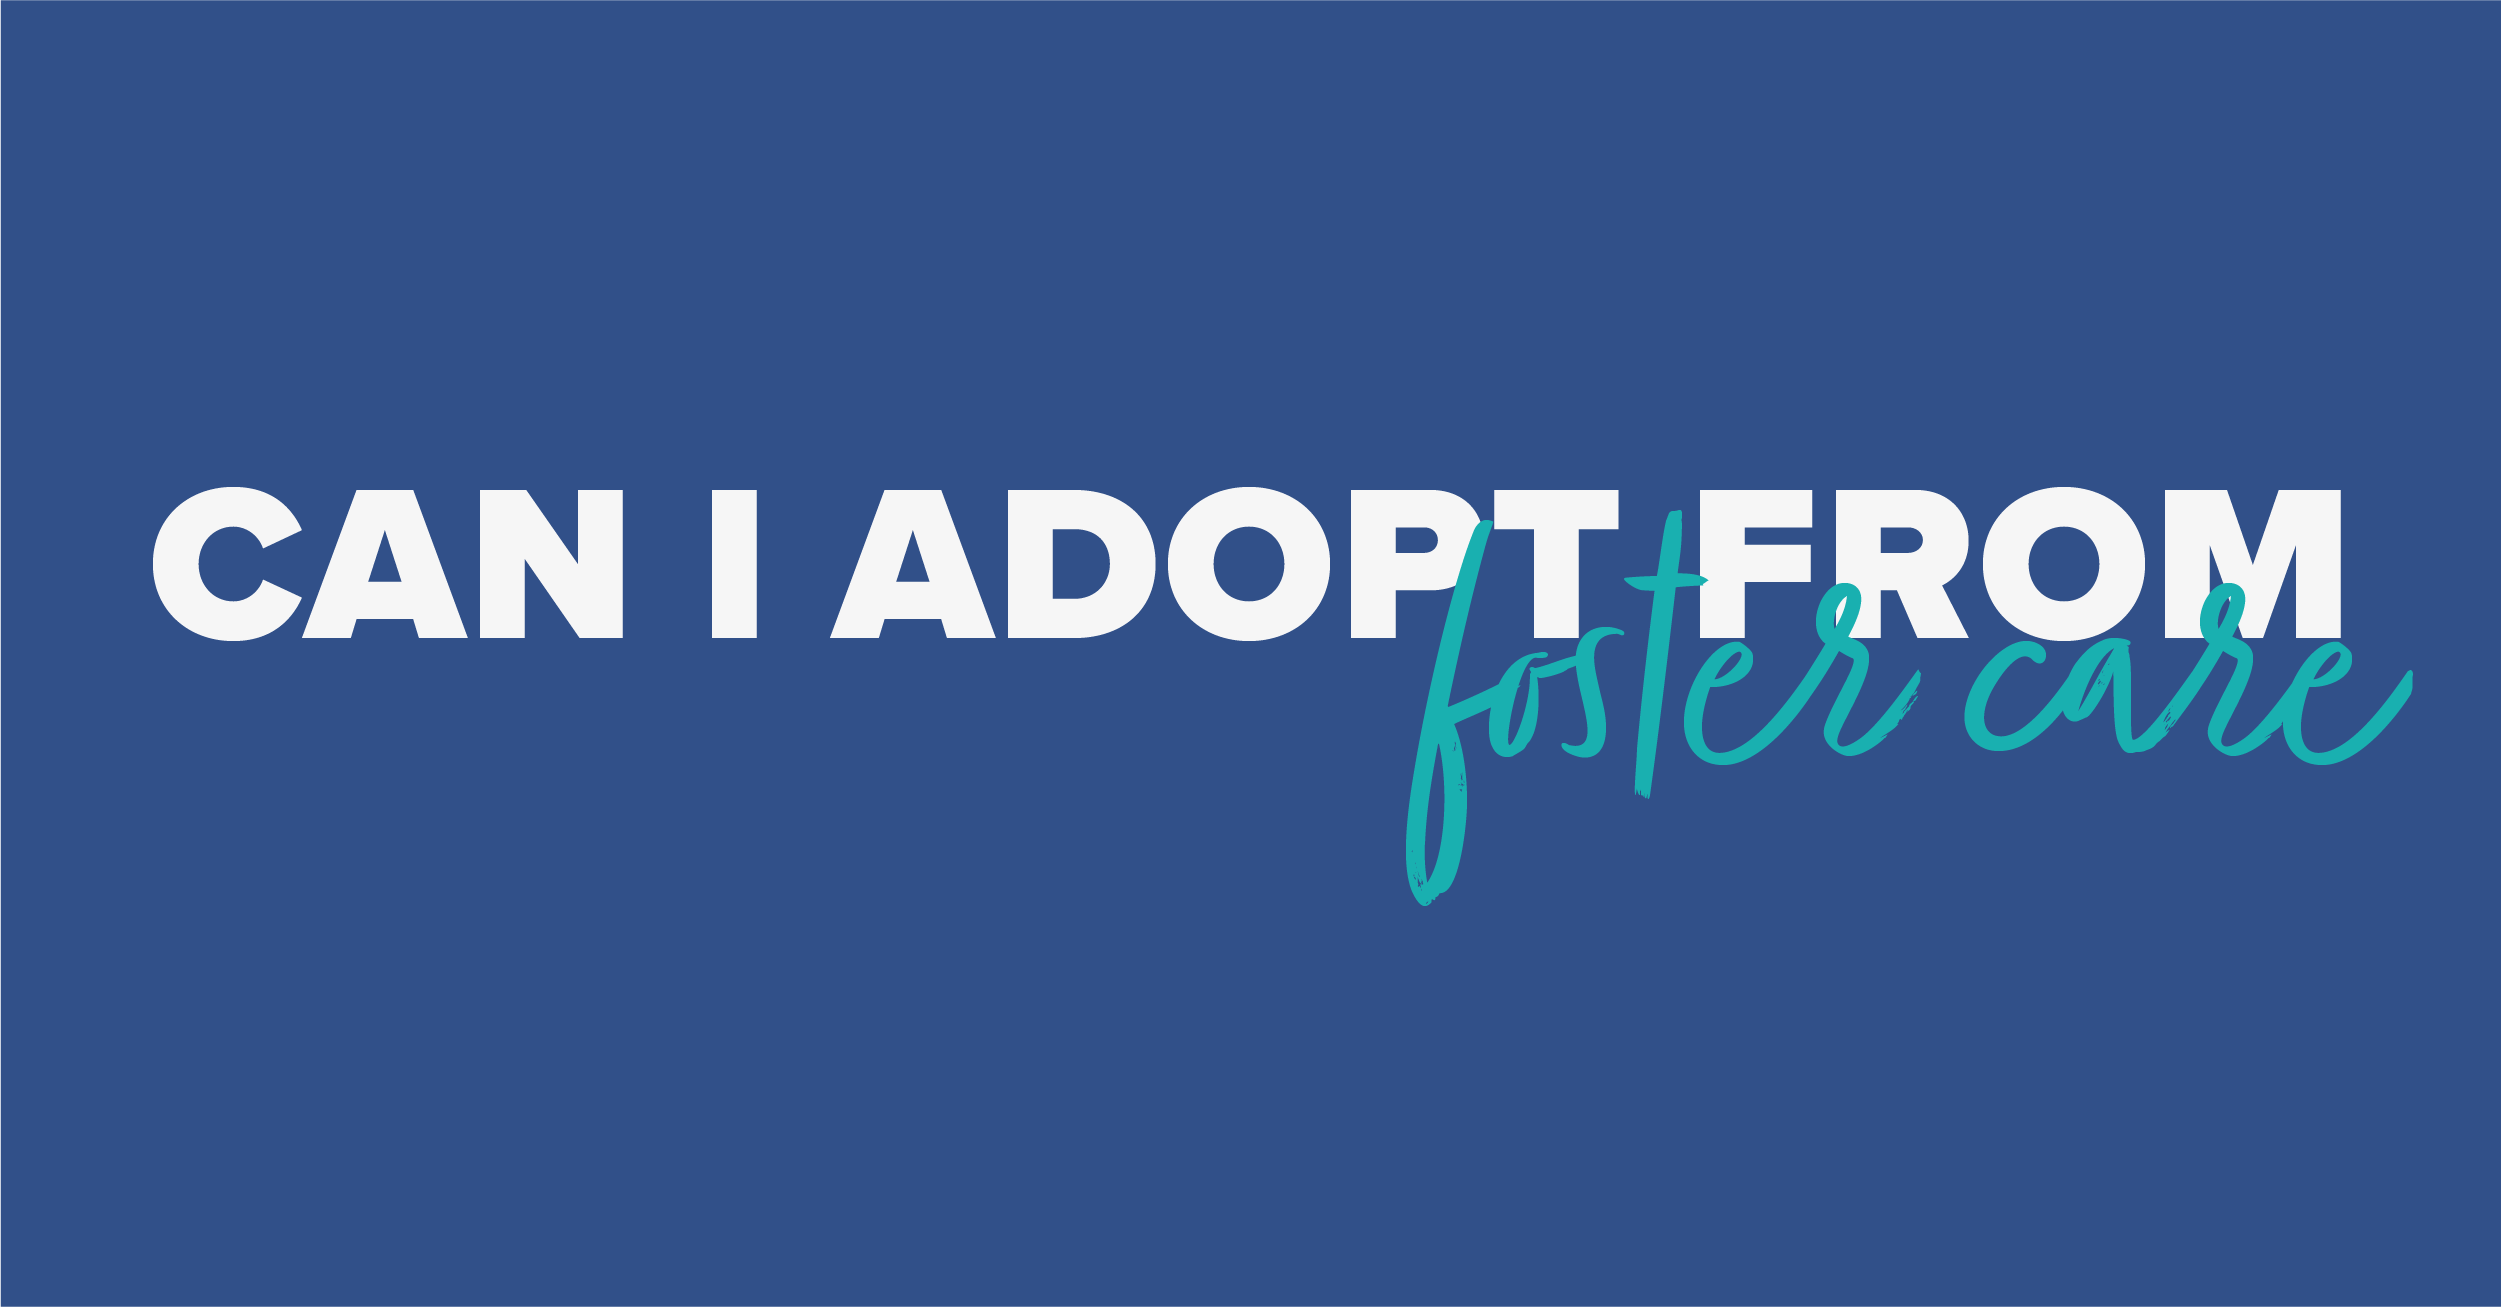 Can I Adopt from Foster care?